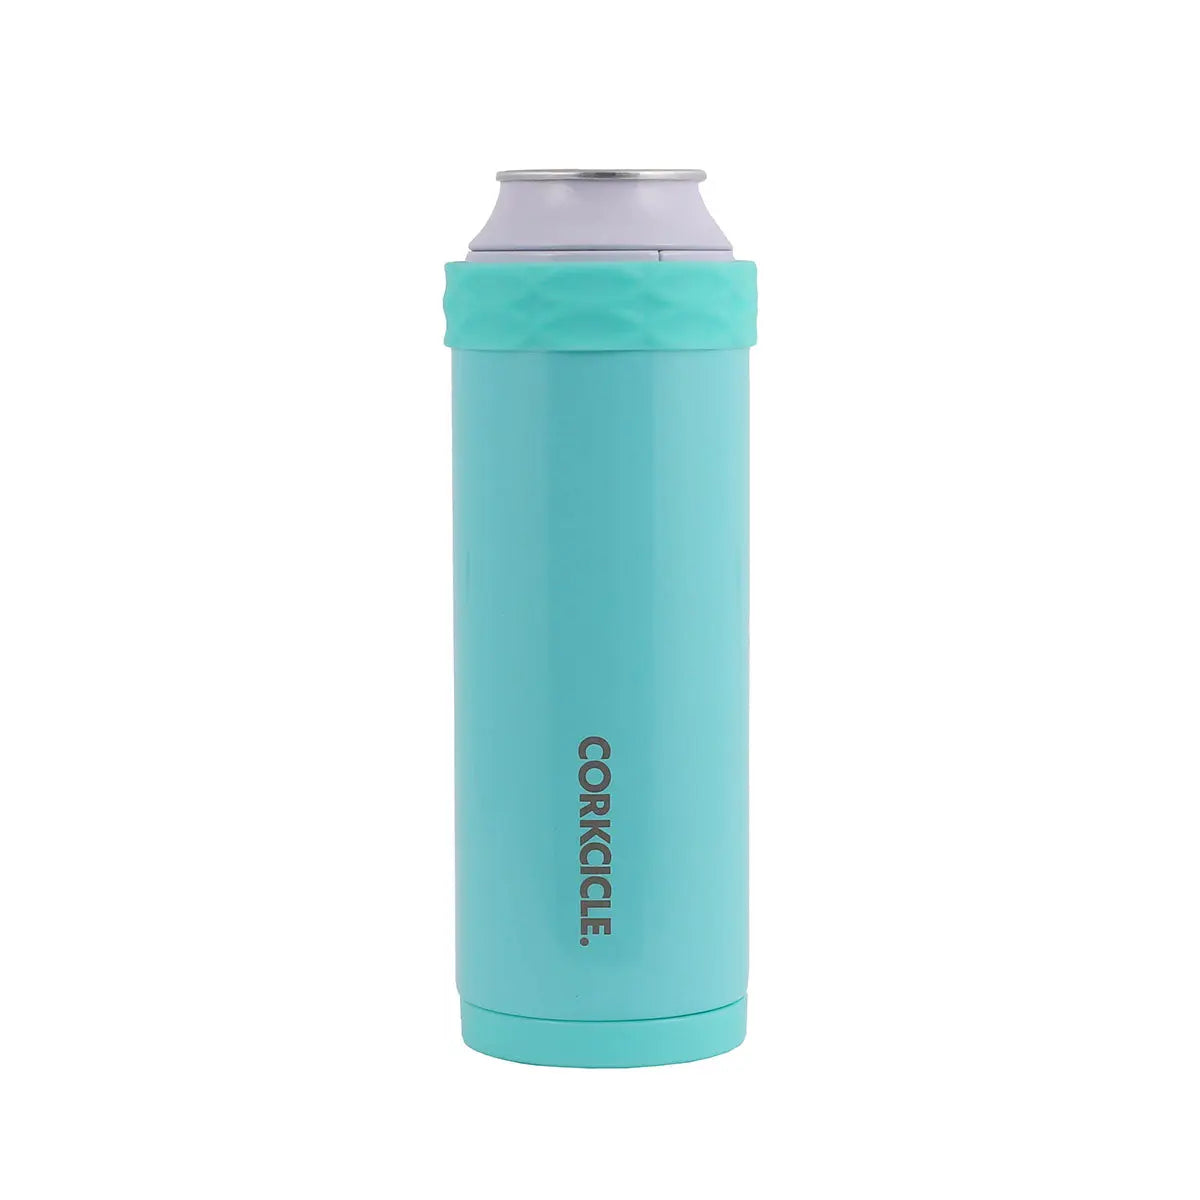 Corkcicle Slim Can Cooler, Stainless Steel, Perfect for Michelob Ultra,  White Claw, Truly & Redbull, Gloss Turquoise, Holds 12 oz Cans